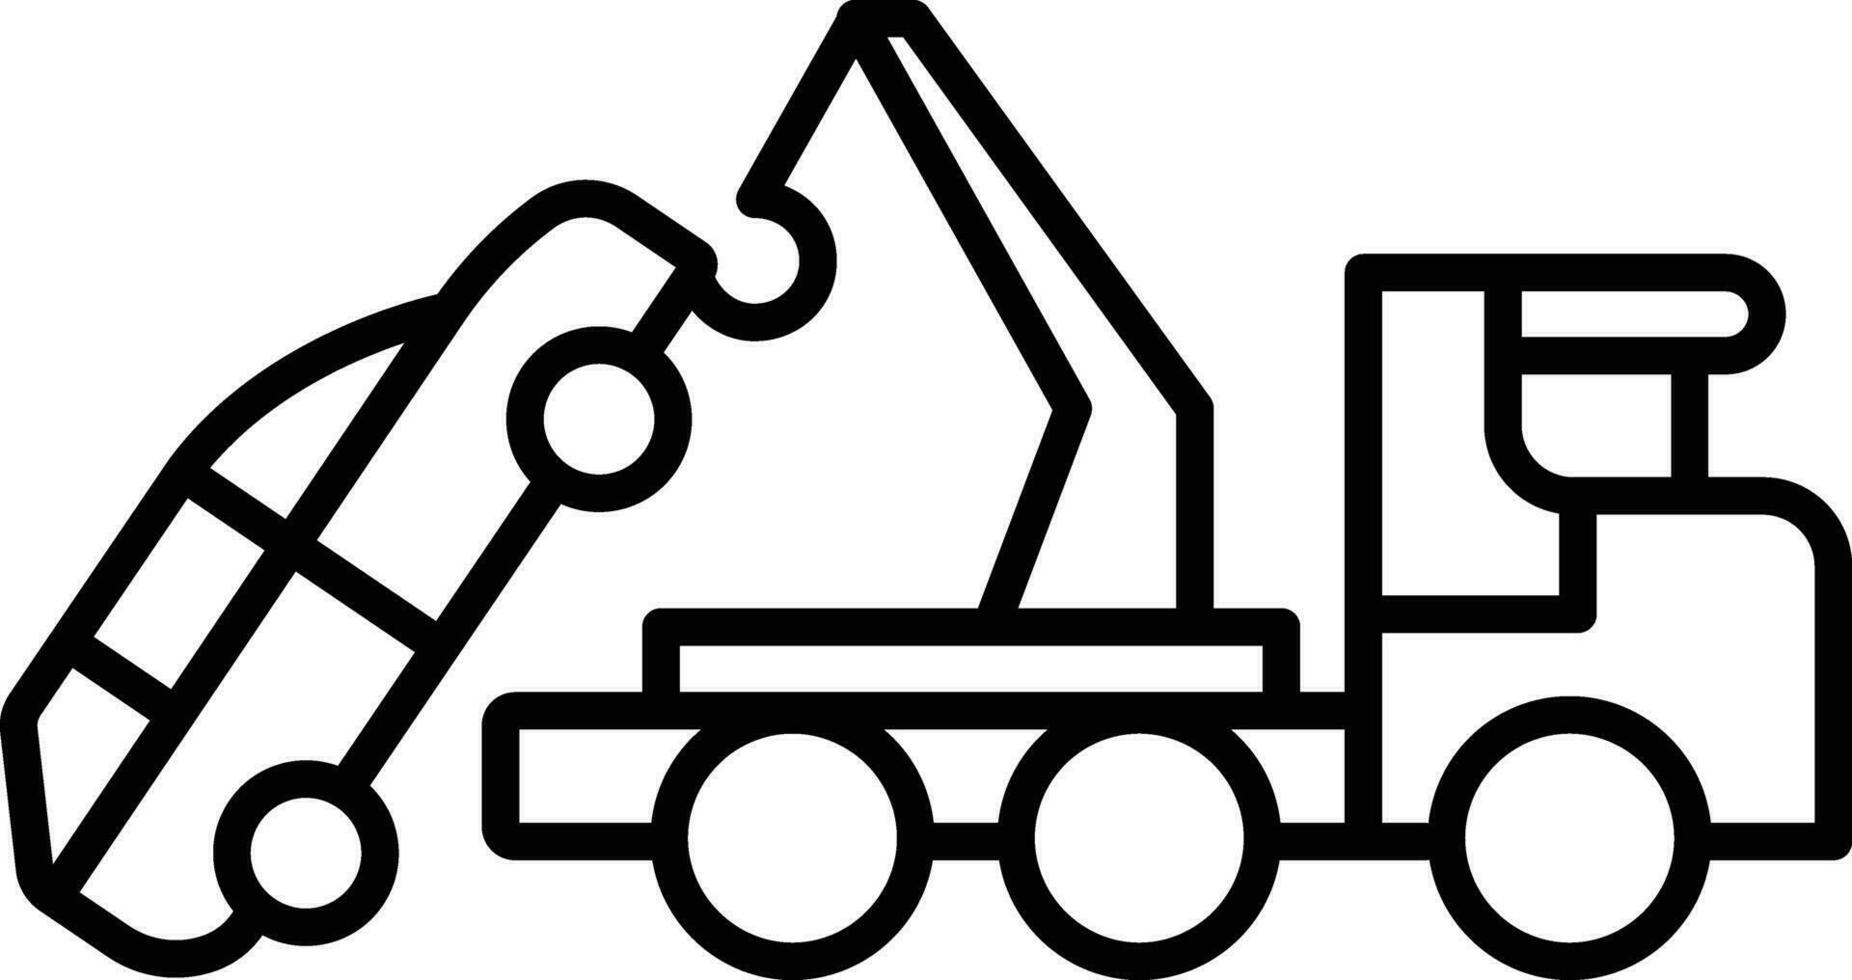 Car Tow Truck Outline vector illustration icon